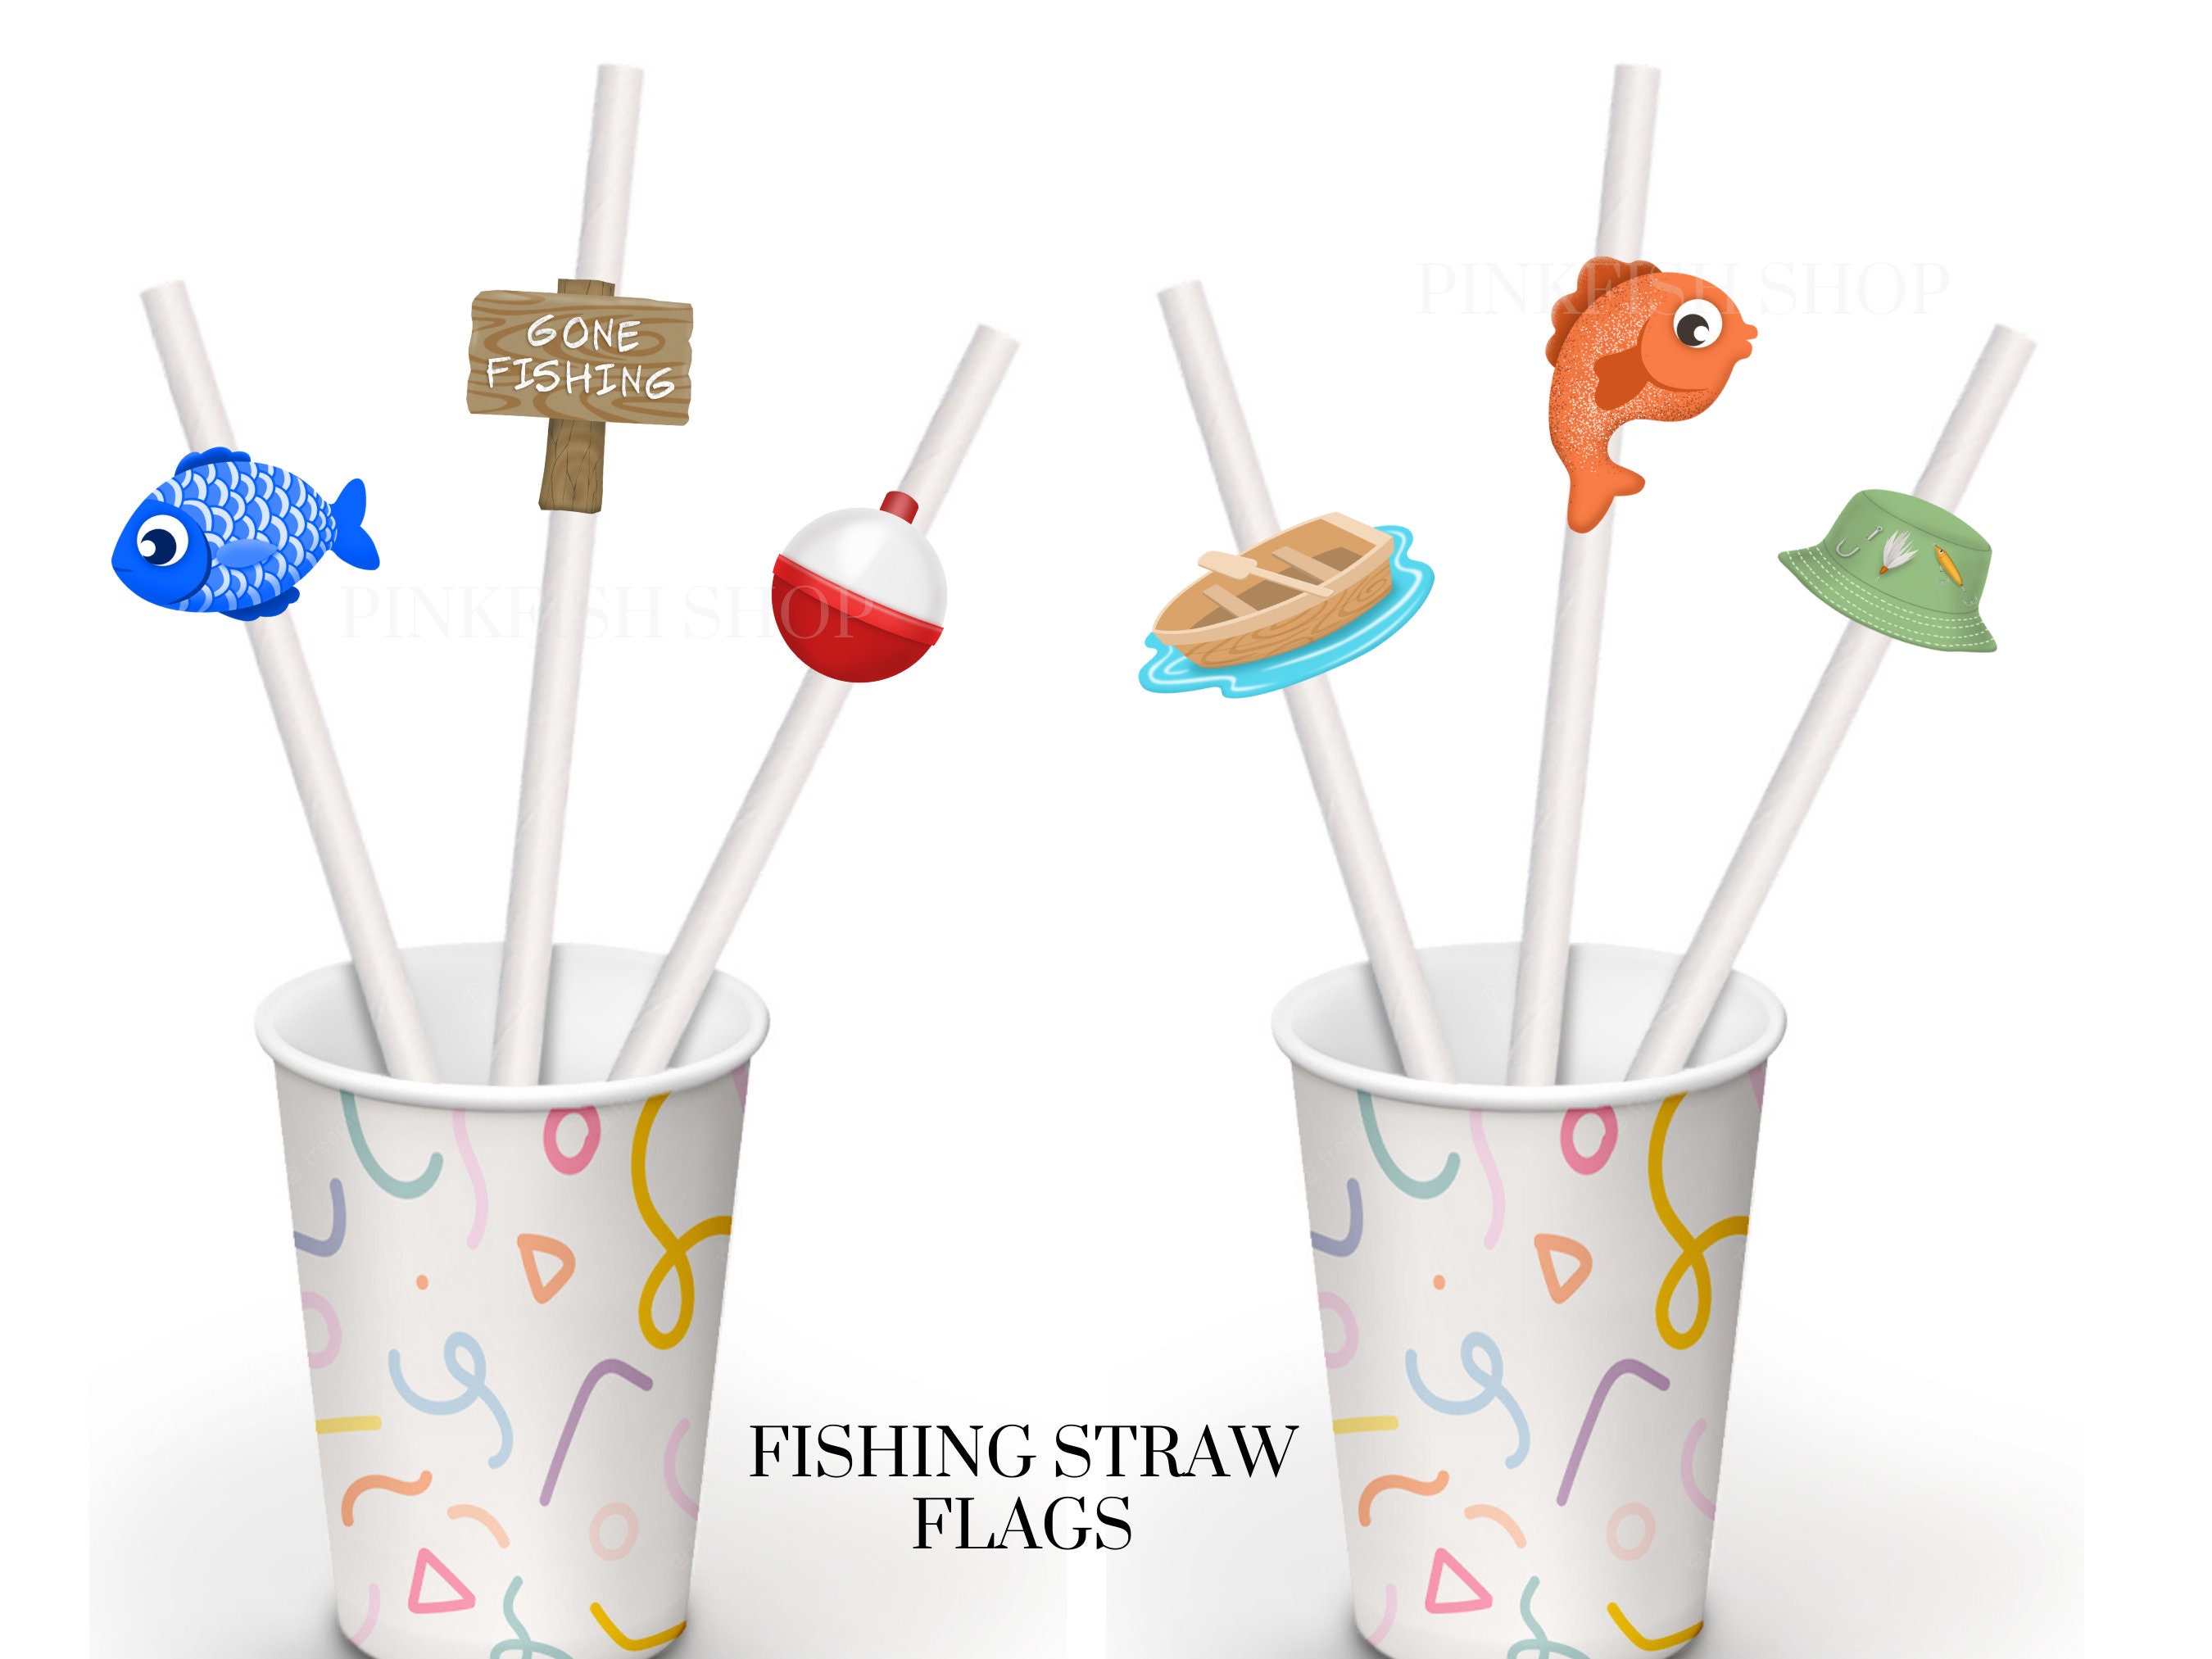 Fishing Themed Straw Flags 24 Count, O'fishally One, Gone Fishing